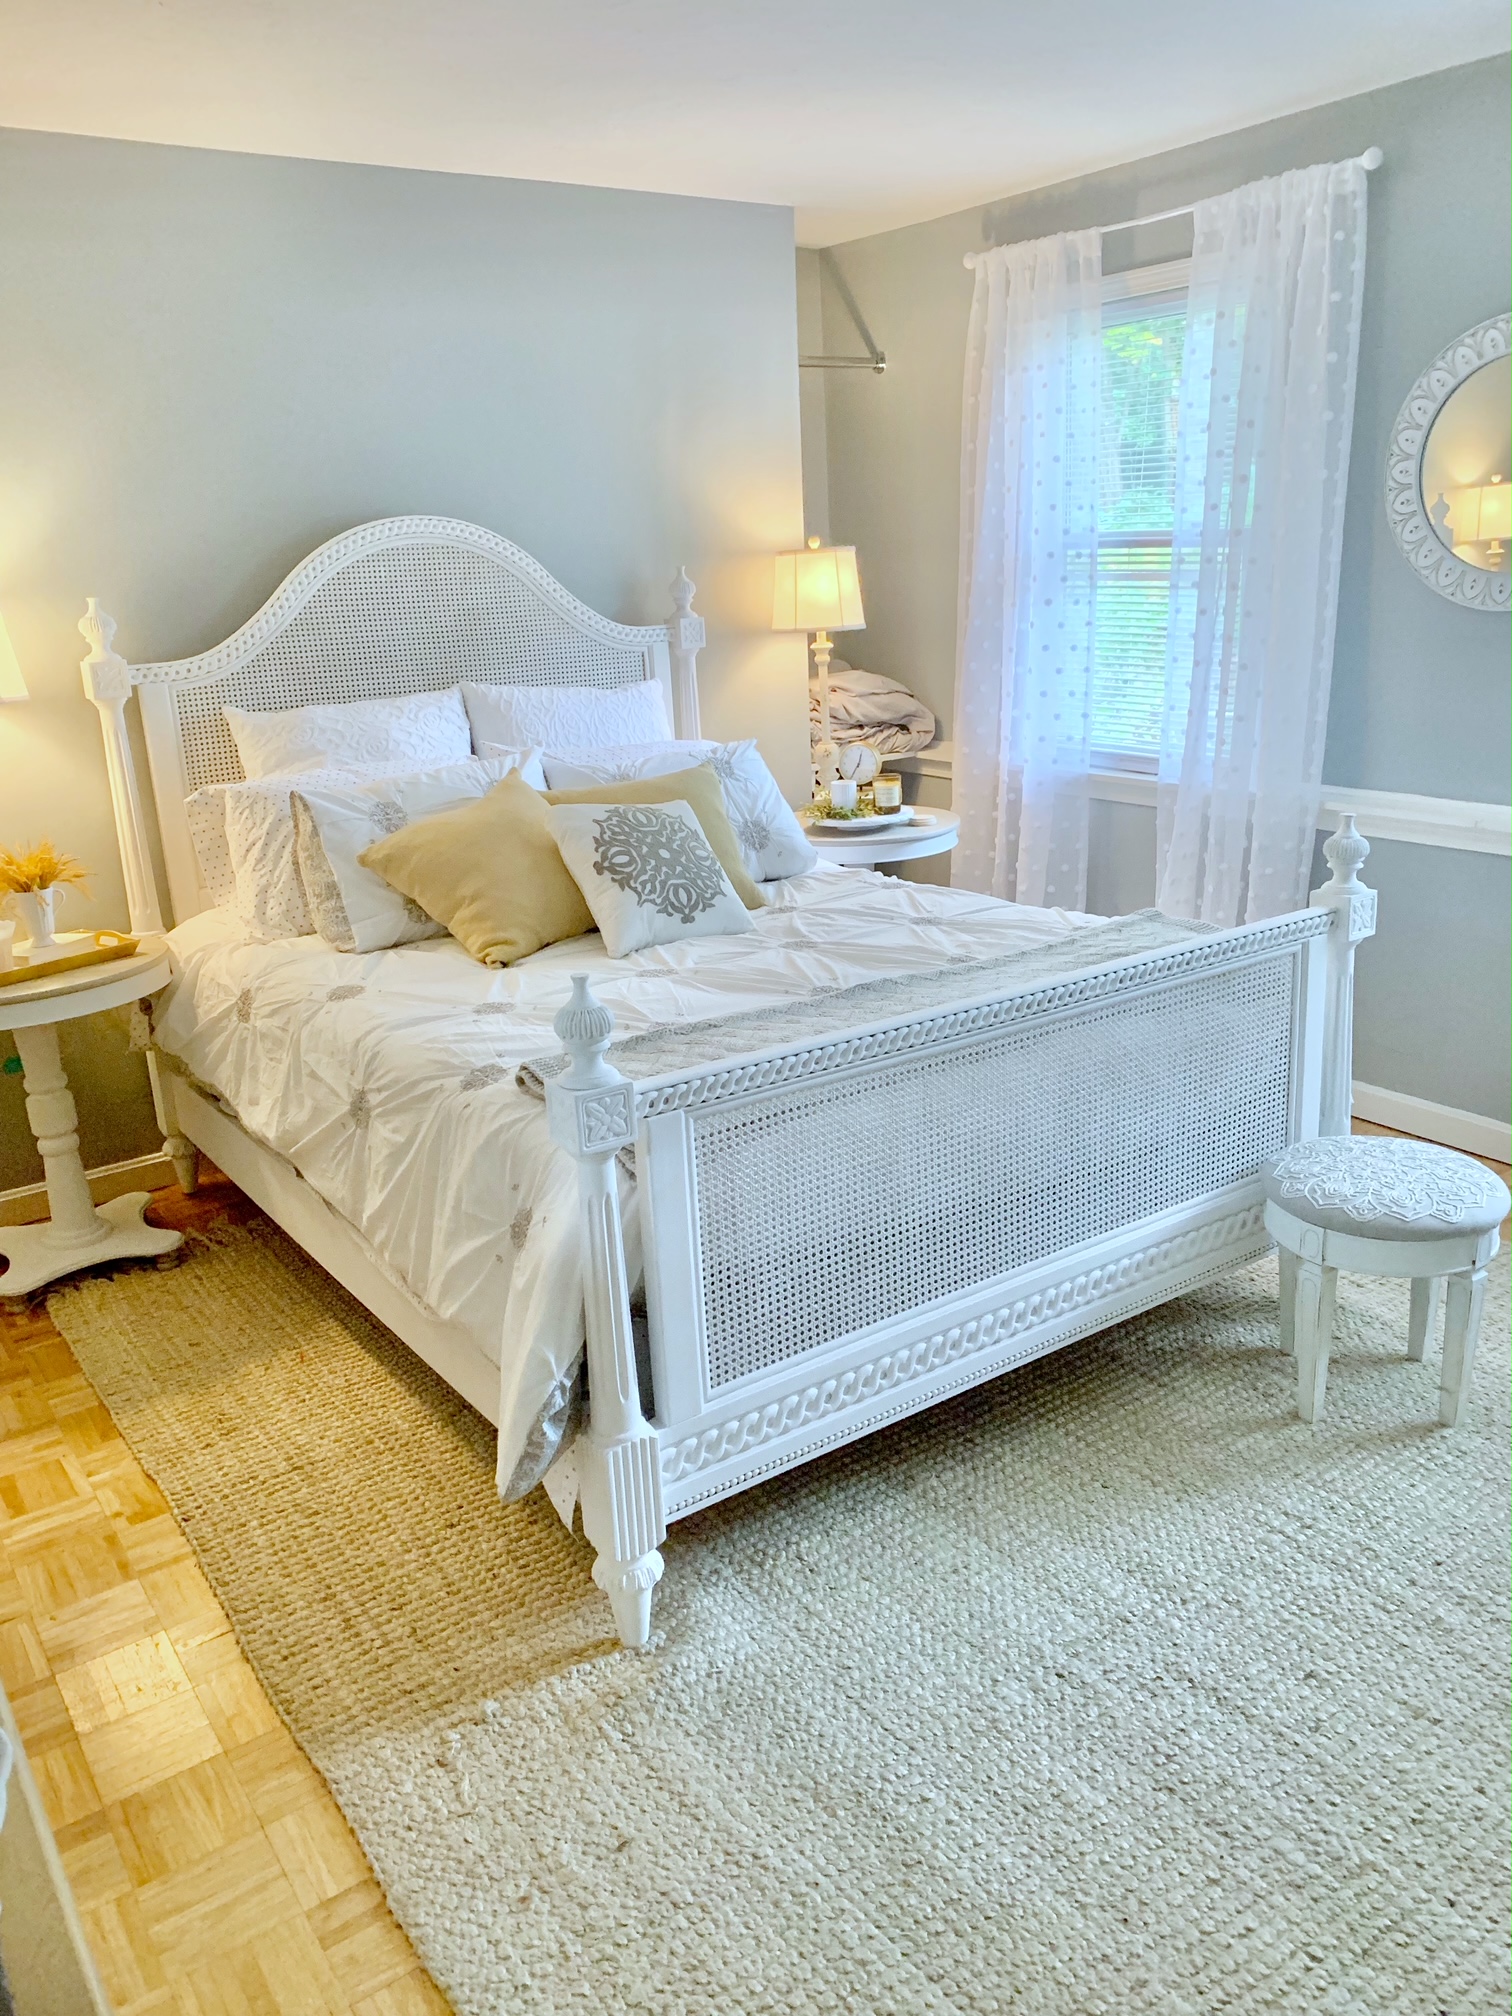 guest bedroom with stool at the foot of the bed. this bedroom is gray, white and gold so the gray stool fits perfectly.